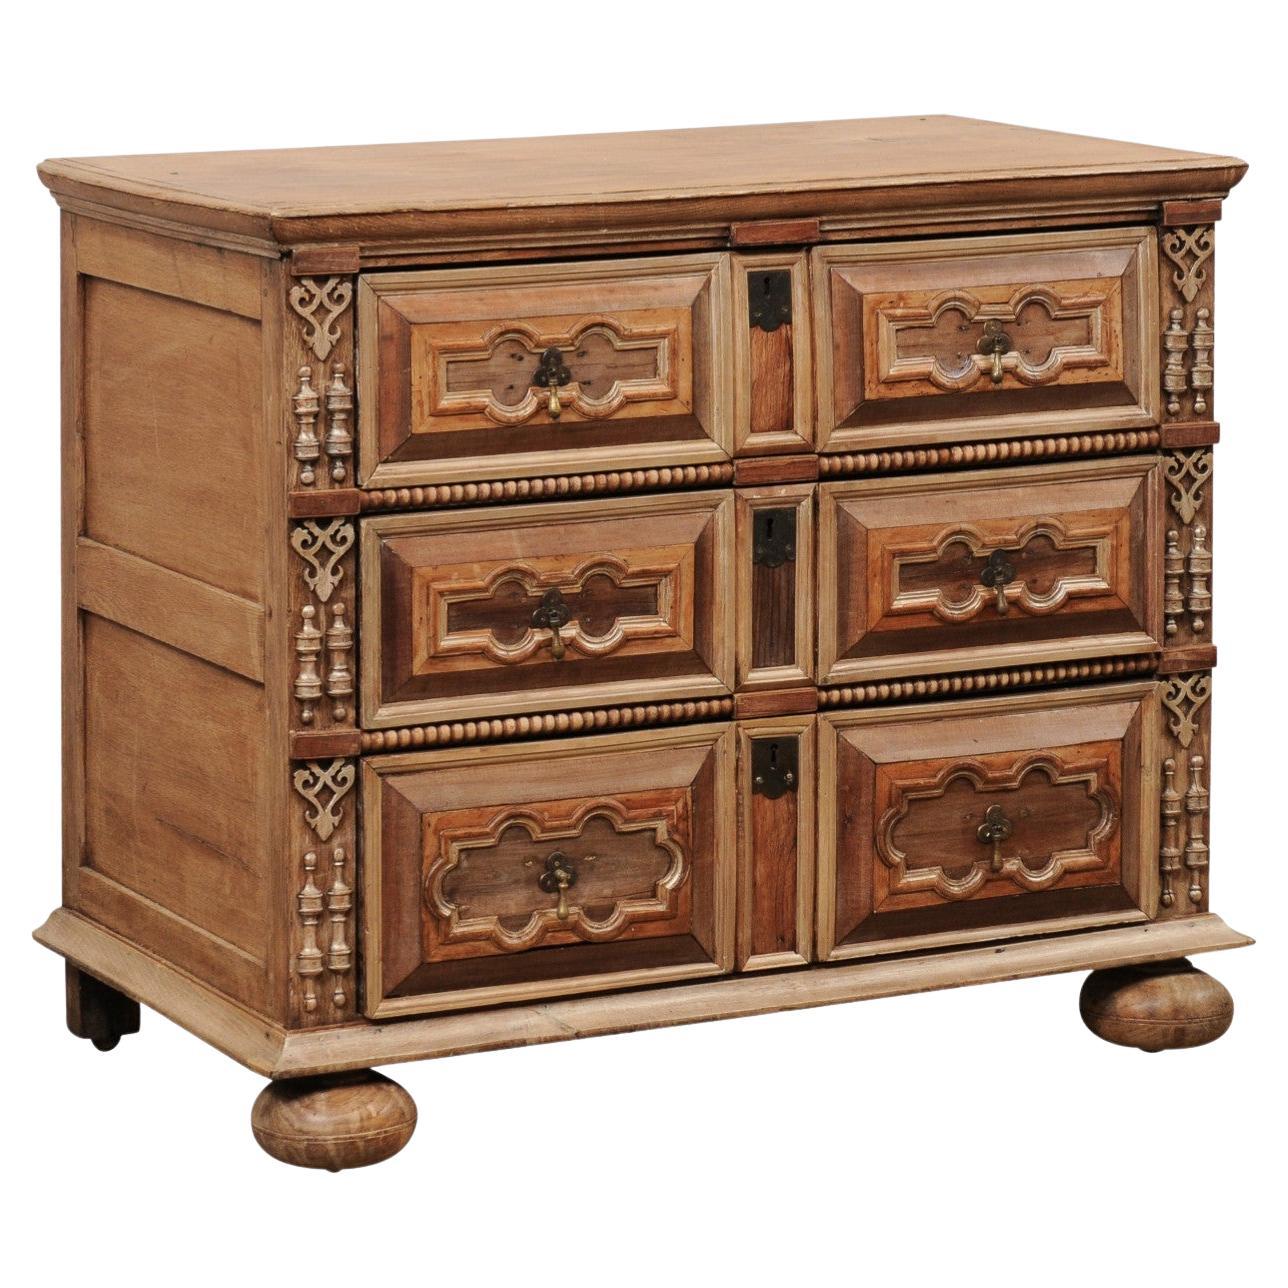 Antique English Highly-Decorated Carved-Wood Chest of Drawers For Sale